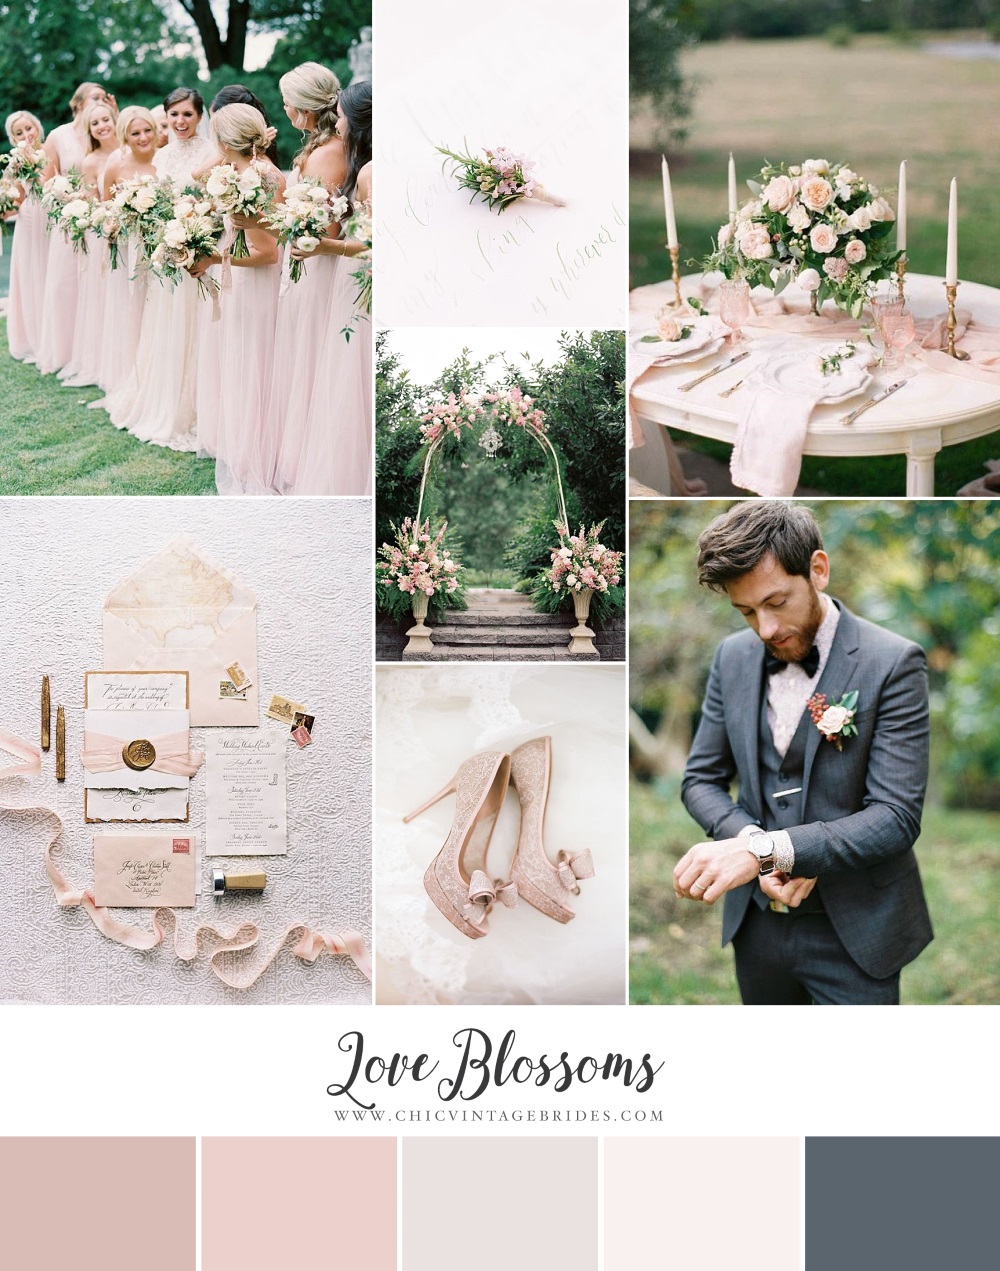 Love Blossoms - Spring Wedding Inspiration in a Pretty Palette of Pinks & Dusky Blue